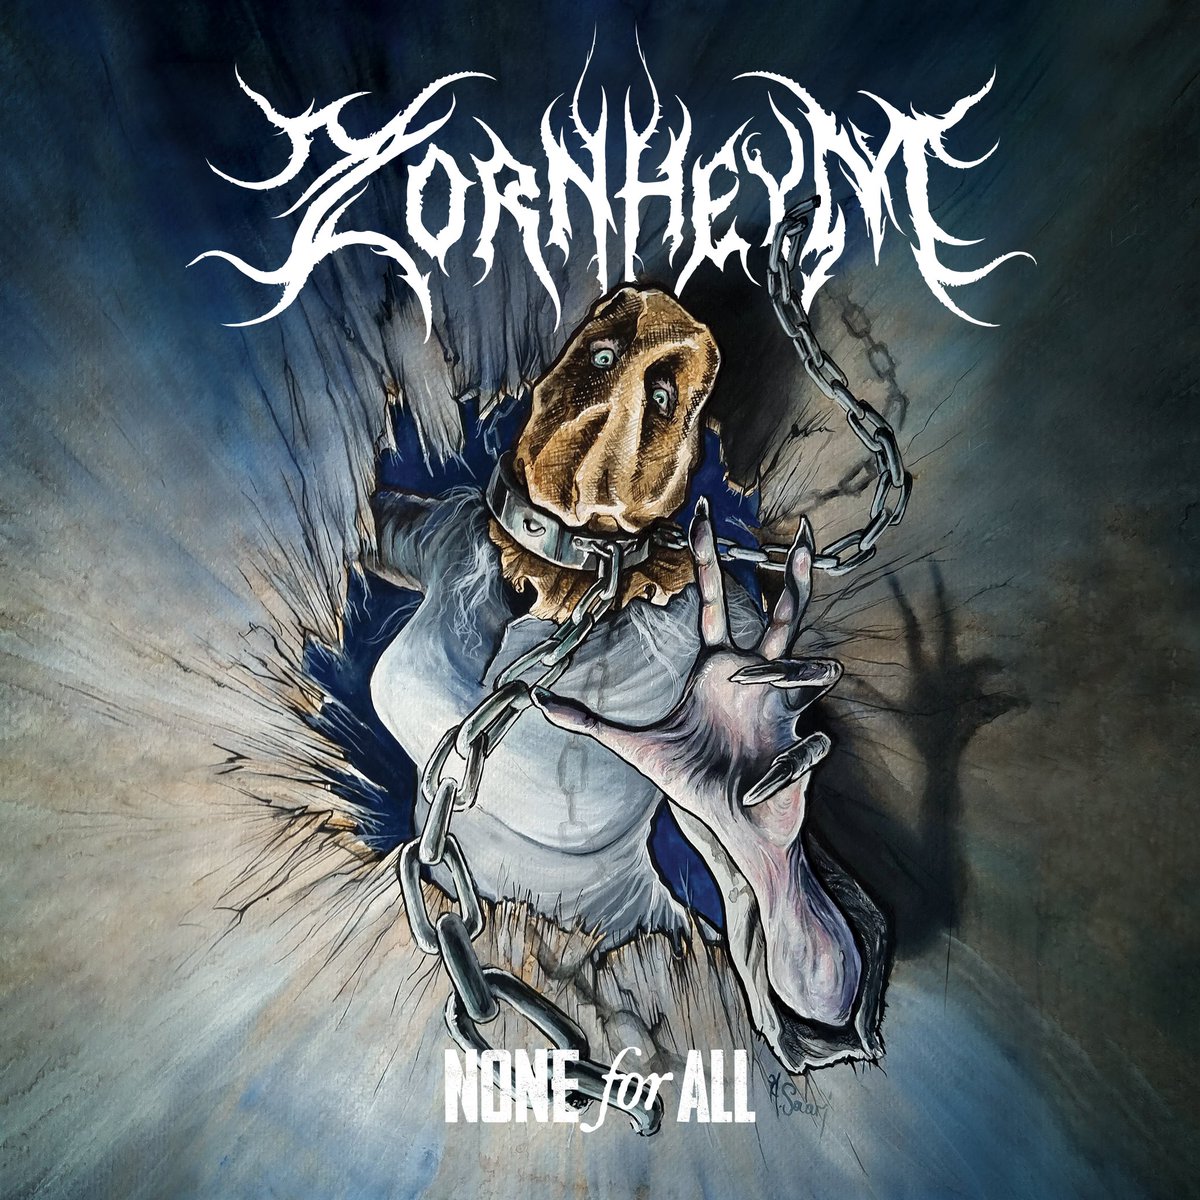 ”None For All” out on the 17th of May on @nobledemonrec . Artwork by: Art Saari Recorded and mixed by Sverker Widgren at @WingStudiosSwe #zornheym #noneforall